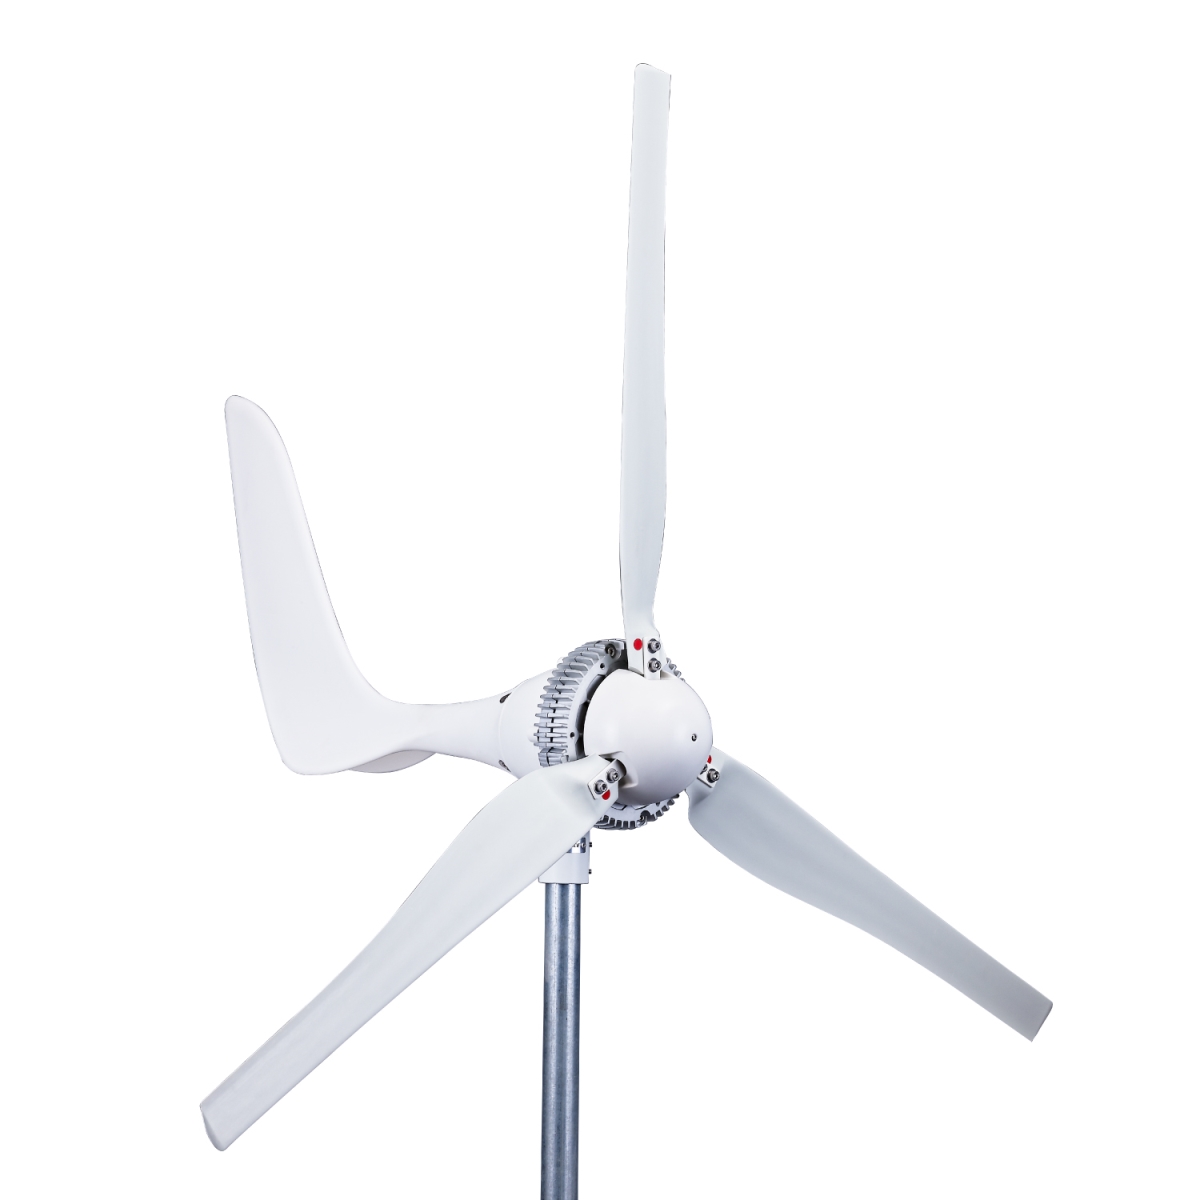 Picture of Automaxx UB1500S124 Windmill 1500W 24V 60A Wind Turbine Generator Kit with Bluetooth Controll, Additional Spare Blade Set